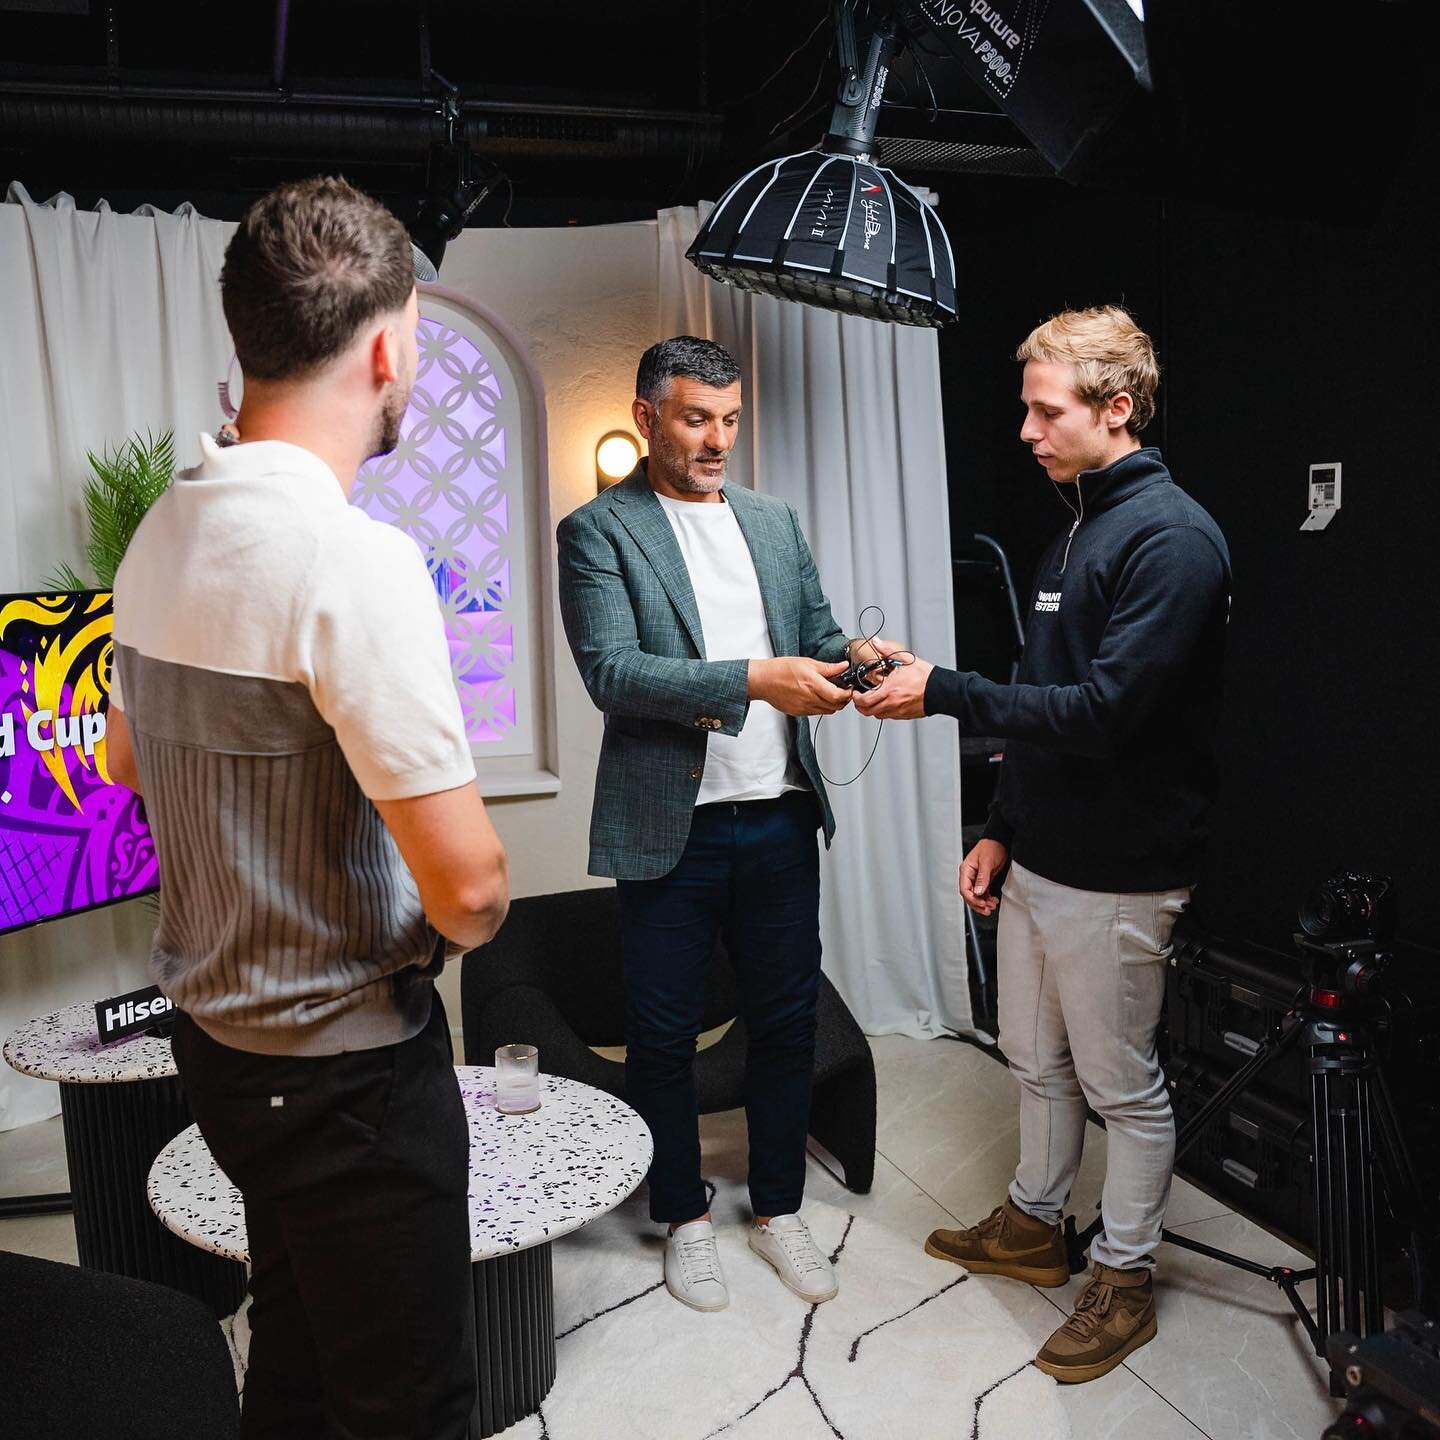 Bit of a pinch yourself week it&rsquo;s been.. kicked off filming a World Cup preview for @elizepequeno from @copa90 on SBS and now heading up the production and editing of the daily on SBS&rsquo; feature show &lsquo;World Cup Daily&rsquo; for @iwant